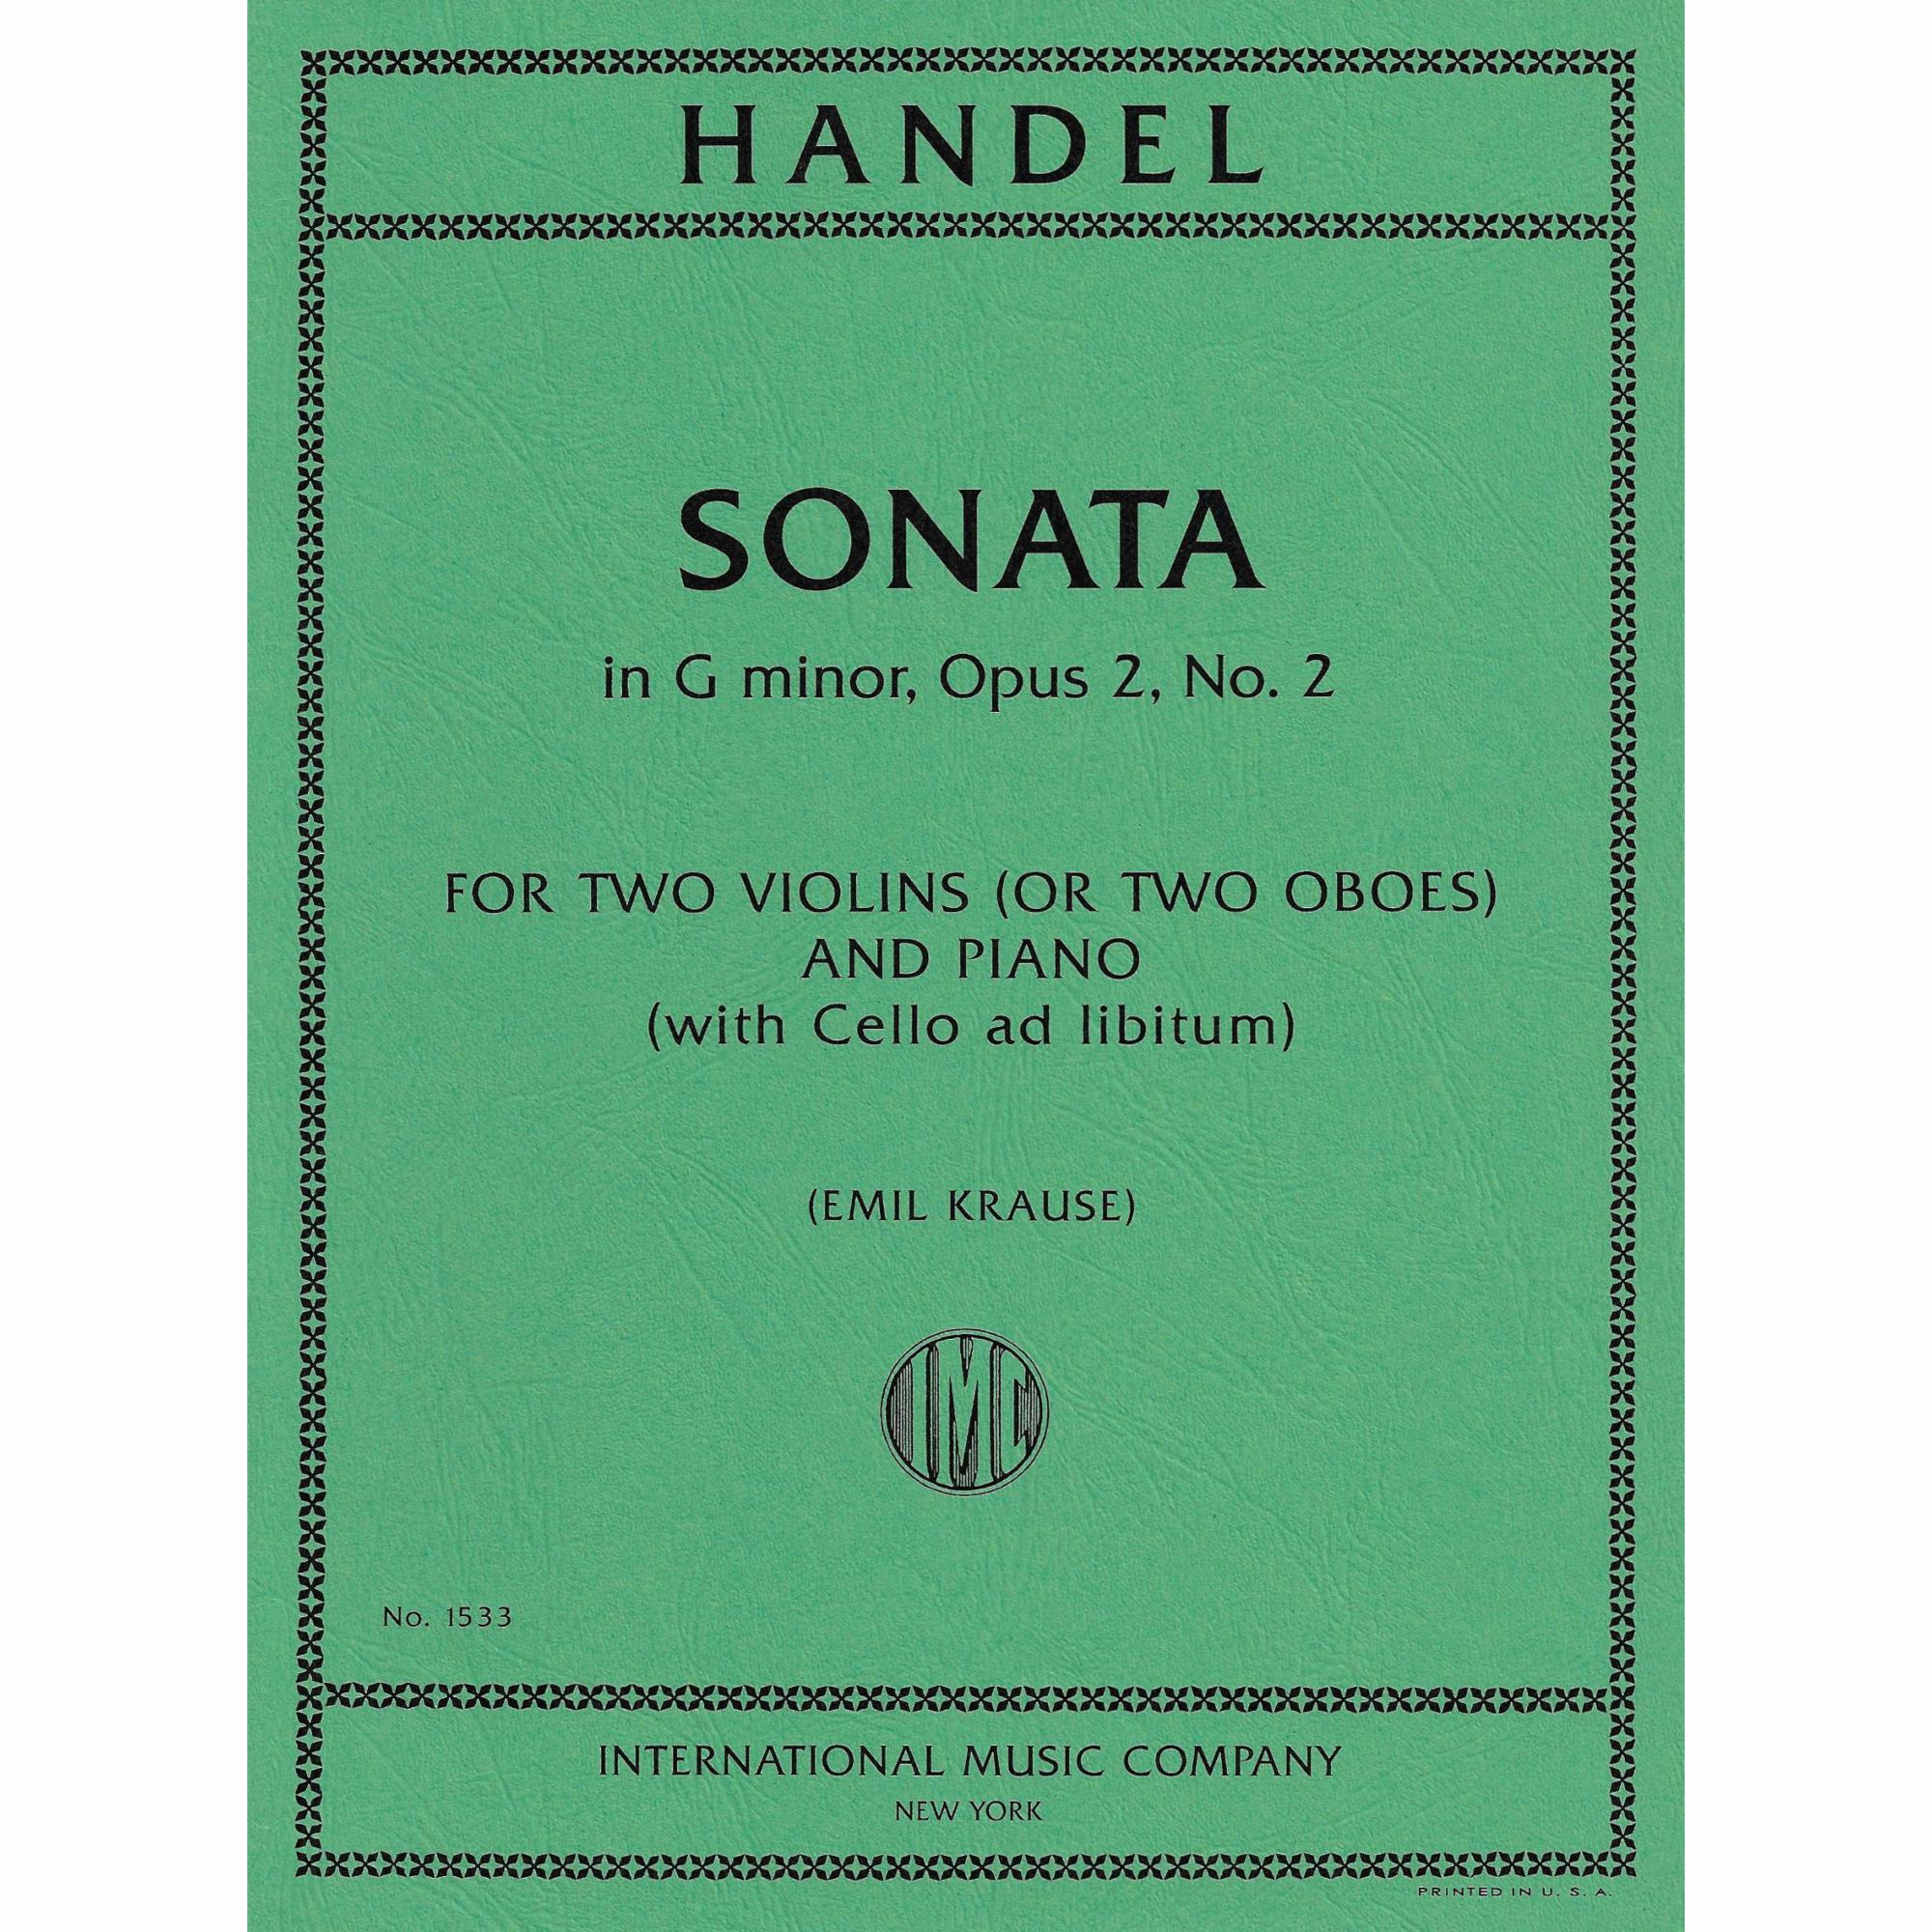 Handel -- Sonata in G Minor, Op. 2, No. 2 for Two Violins and Piano